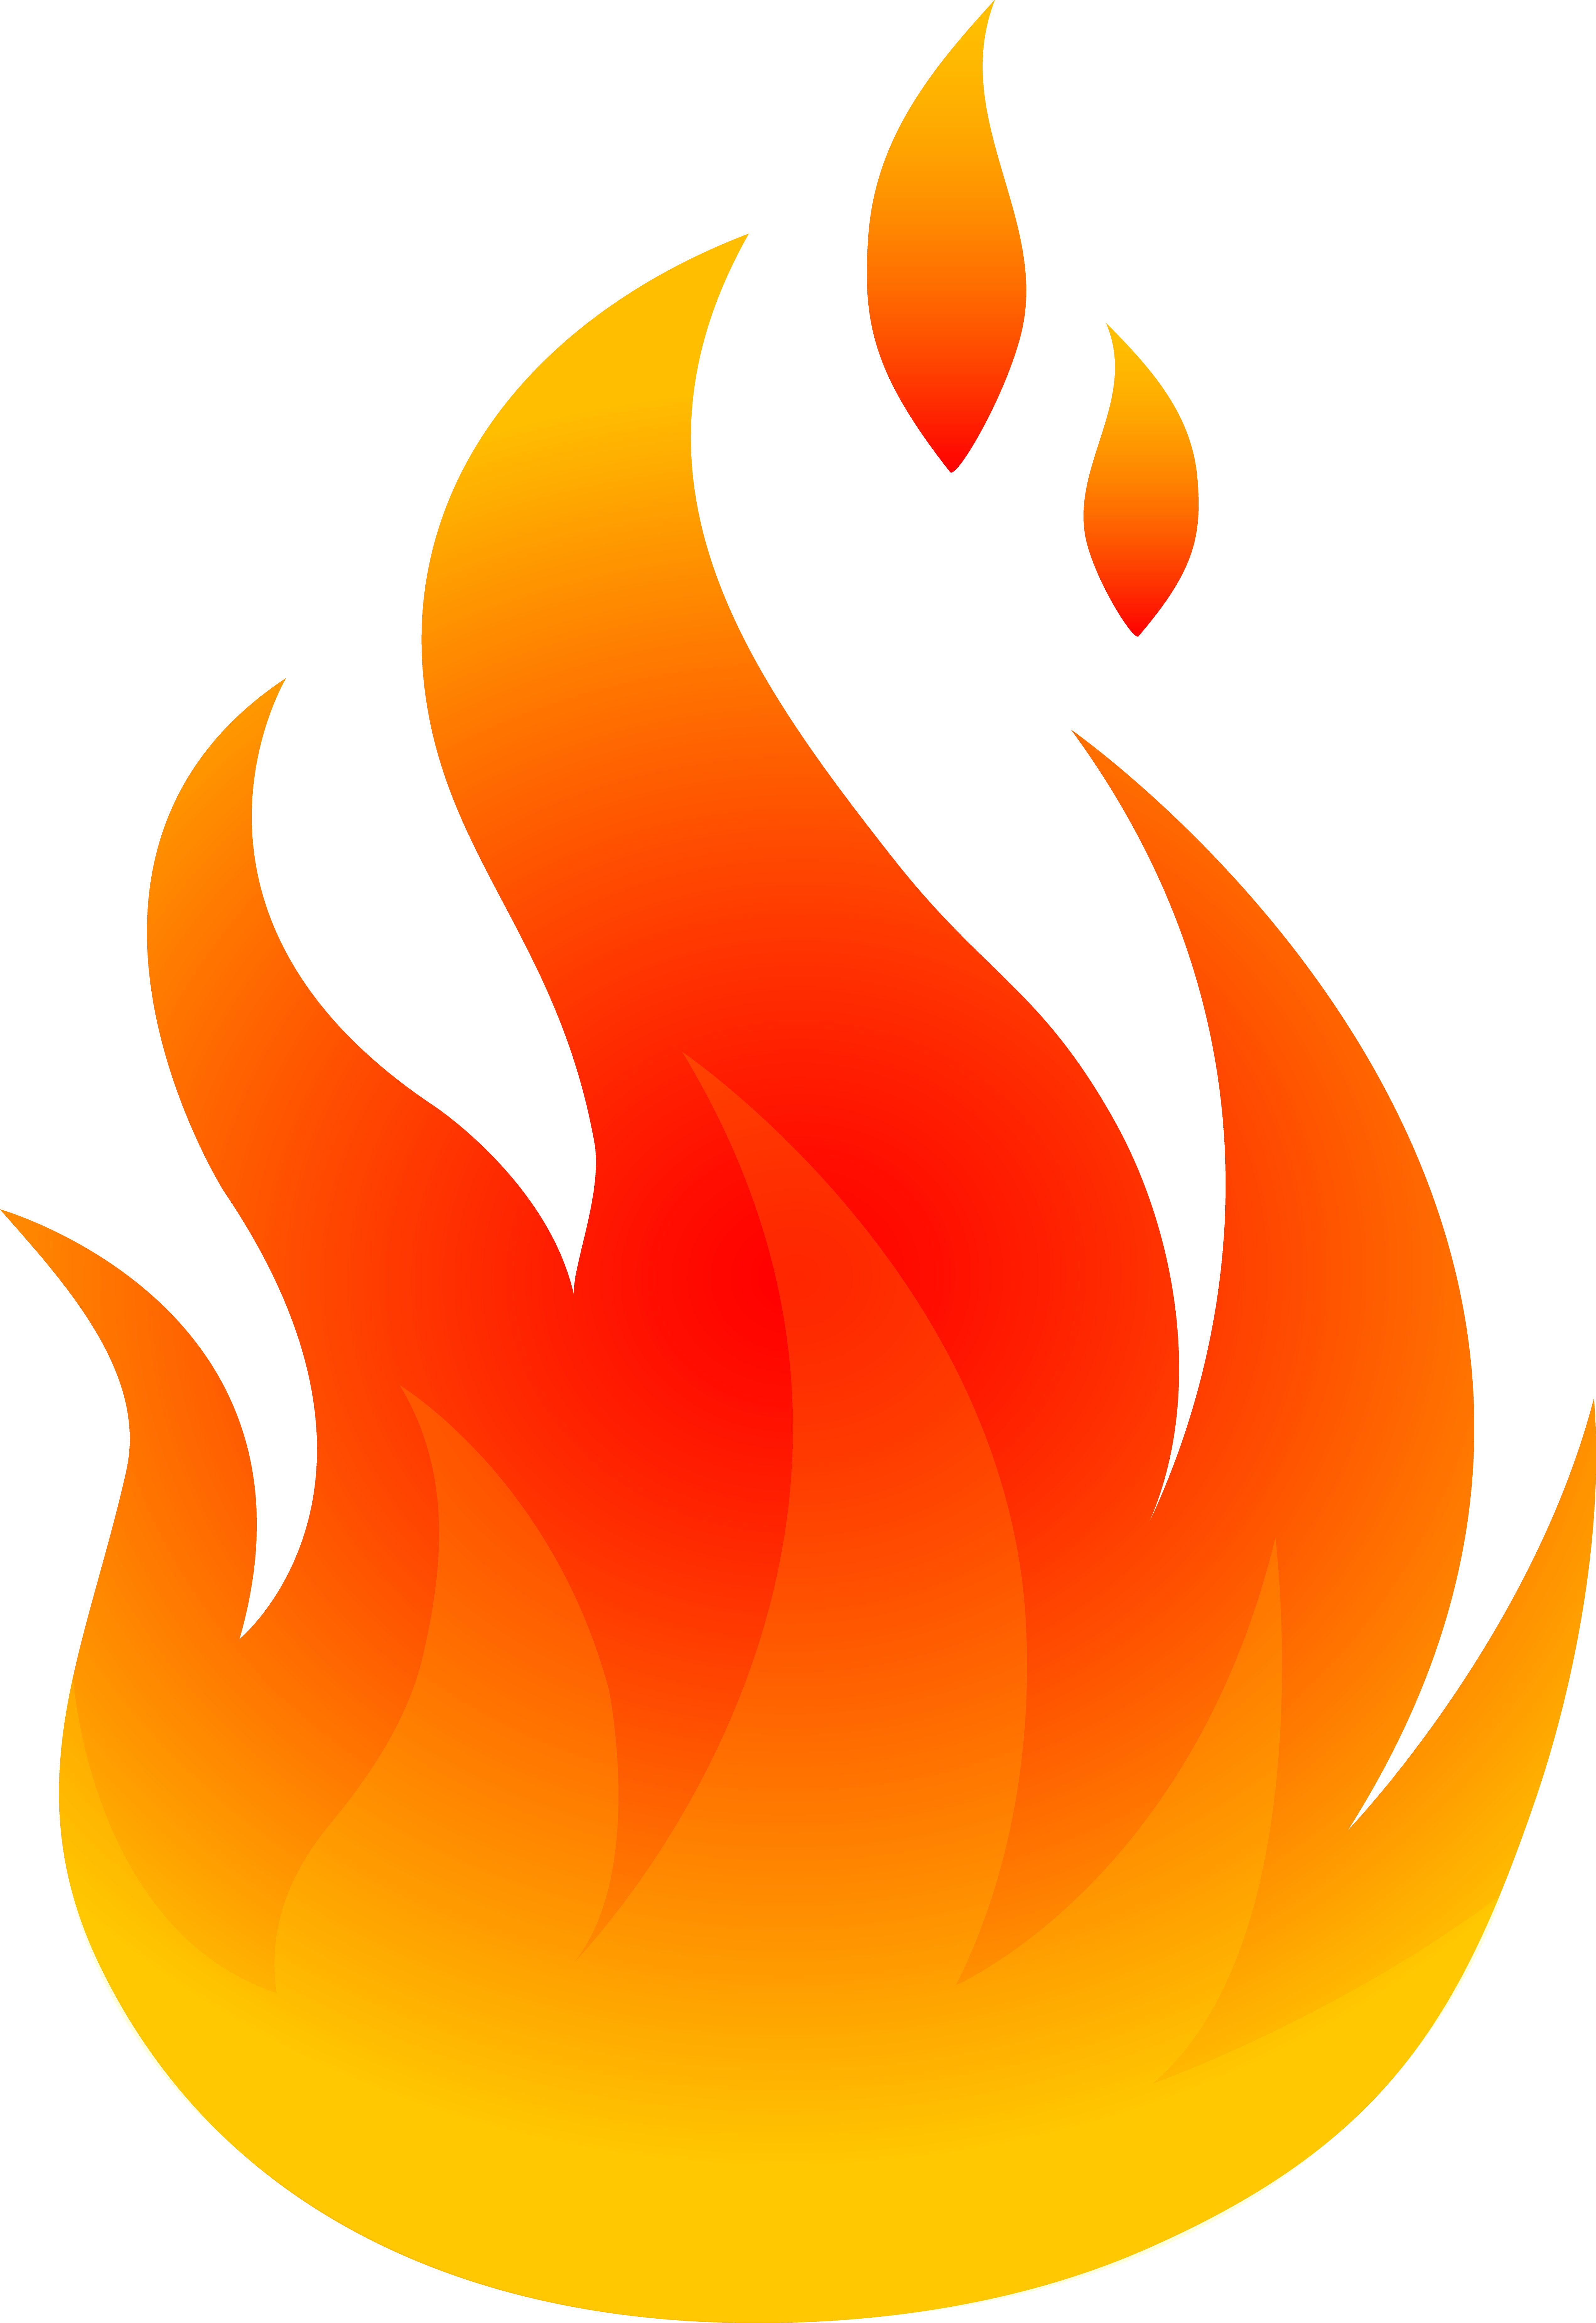 Flame Logo Png #4872 - Free Icons and PNG Backgrounds